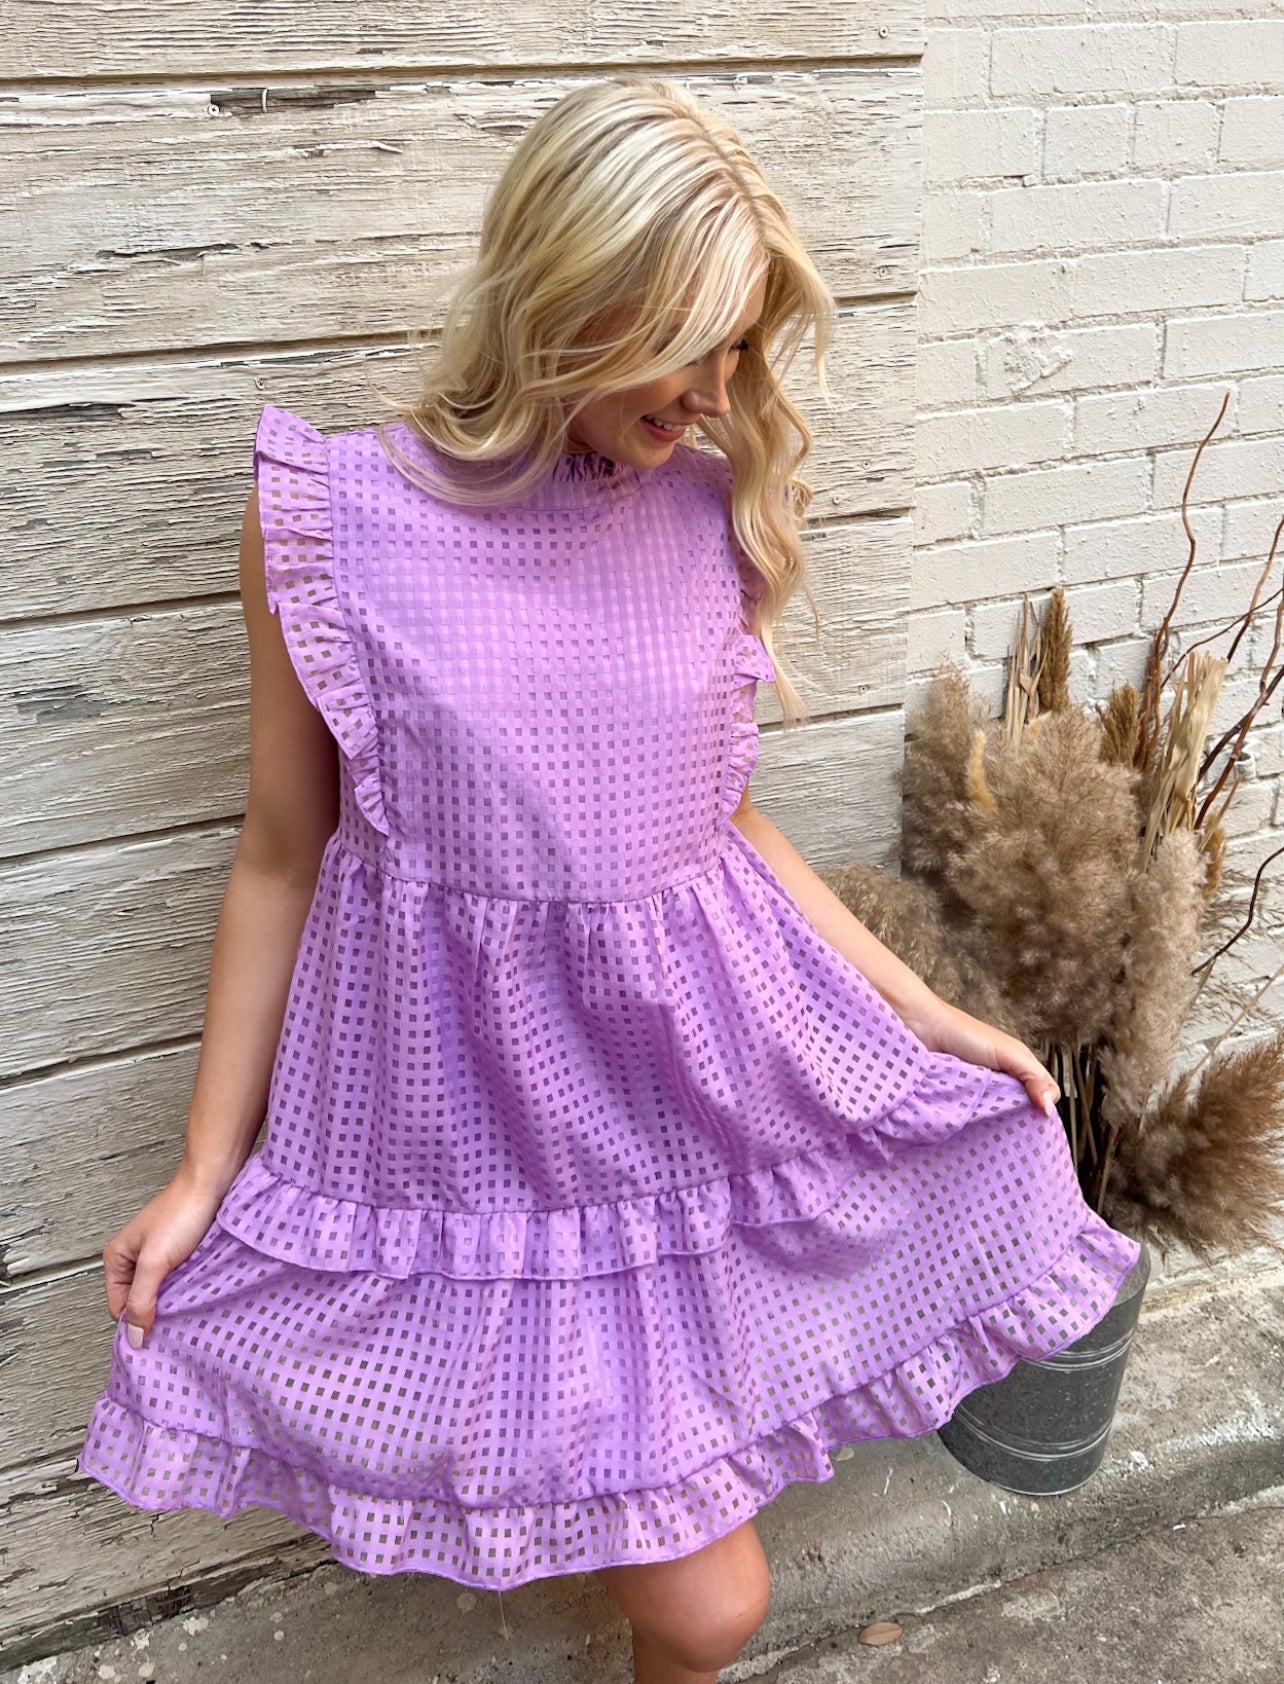 The Textured Check Dress